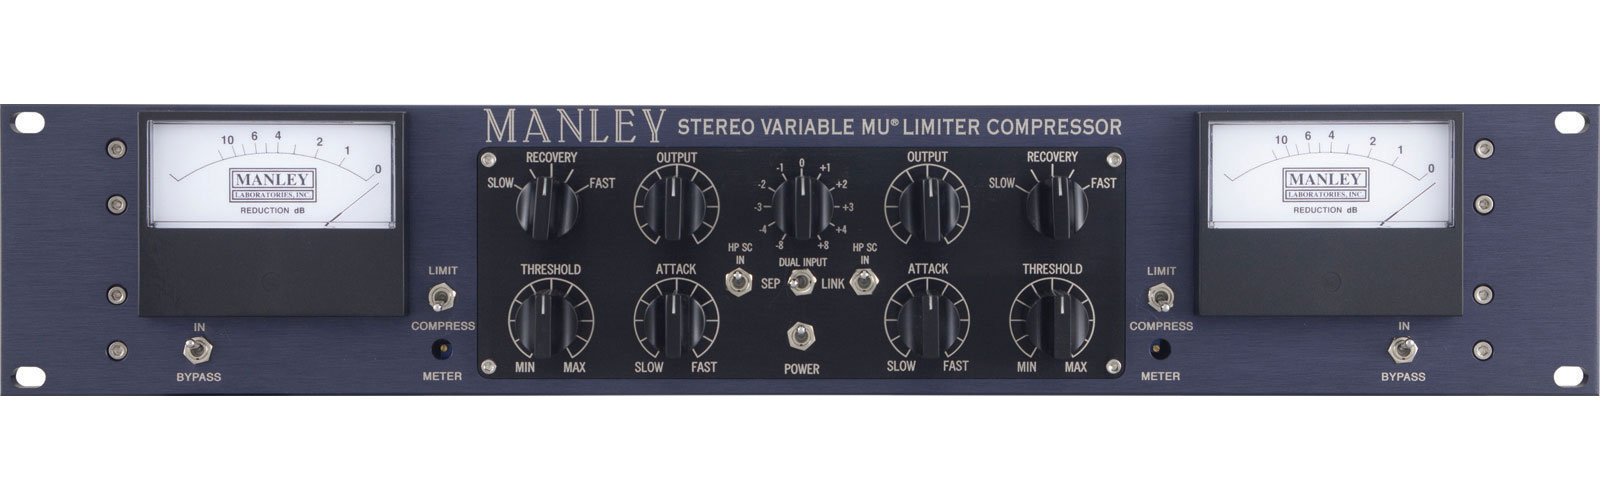 MANLEY VARIABLE MU THE WORKS